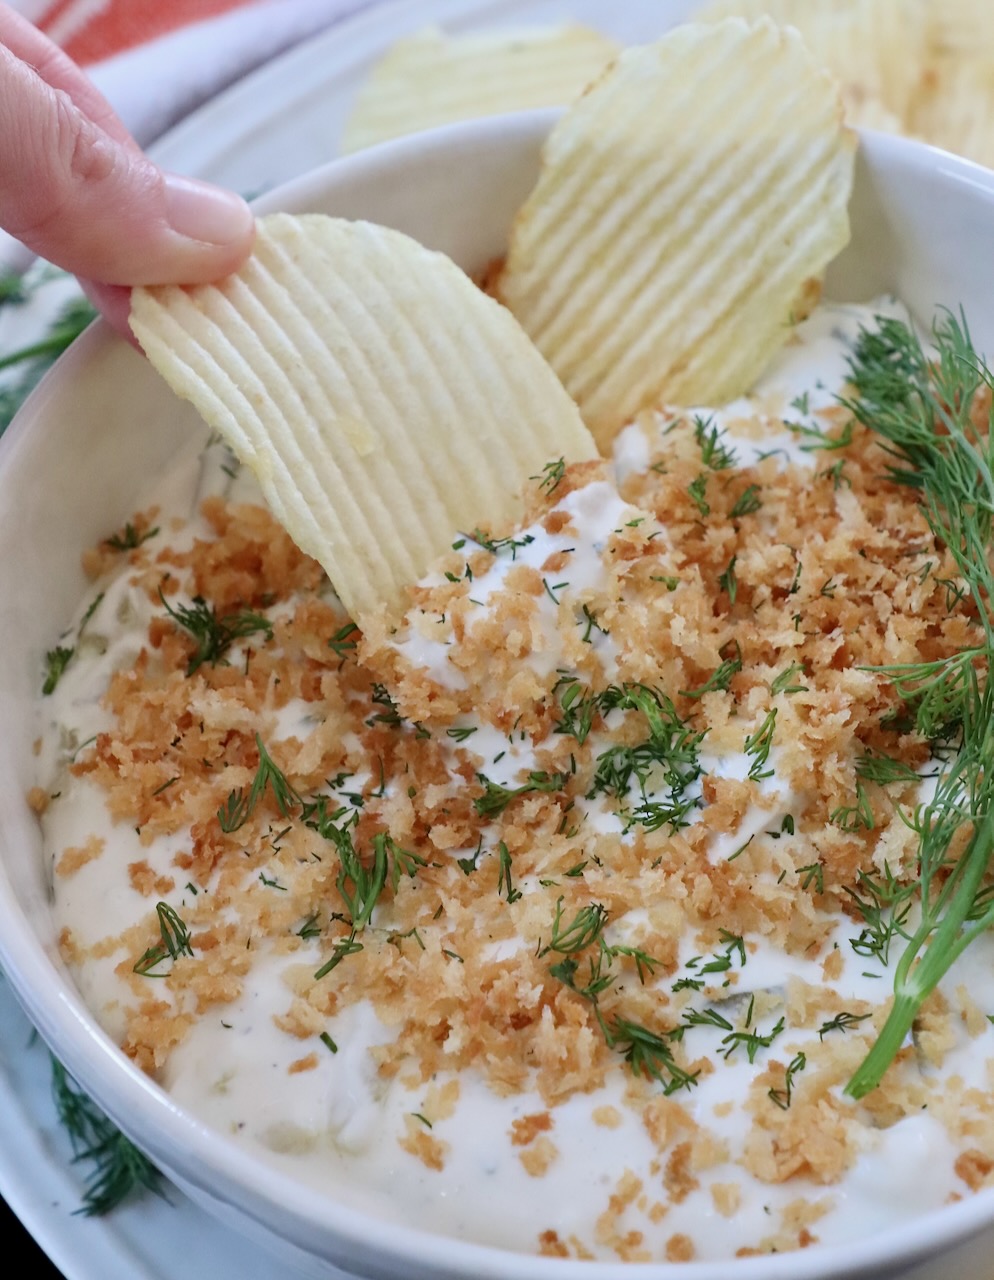 pickle dip in bowl topped with toasted breadcrumbs, with chip dipped into the bowl of dip